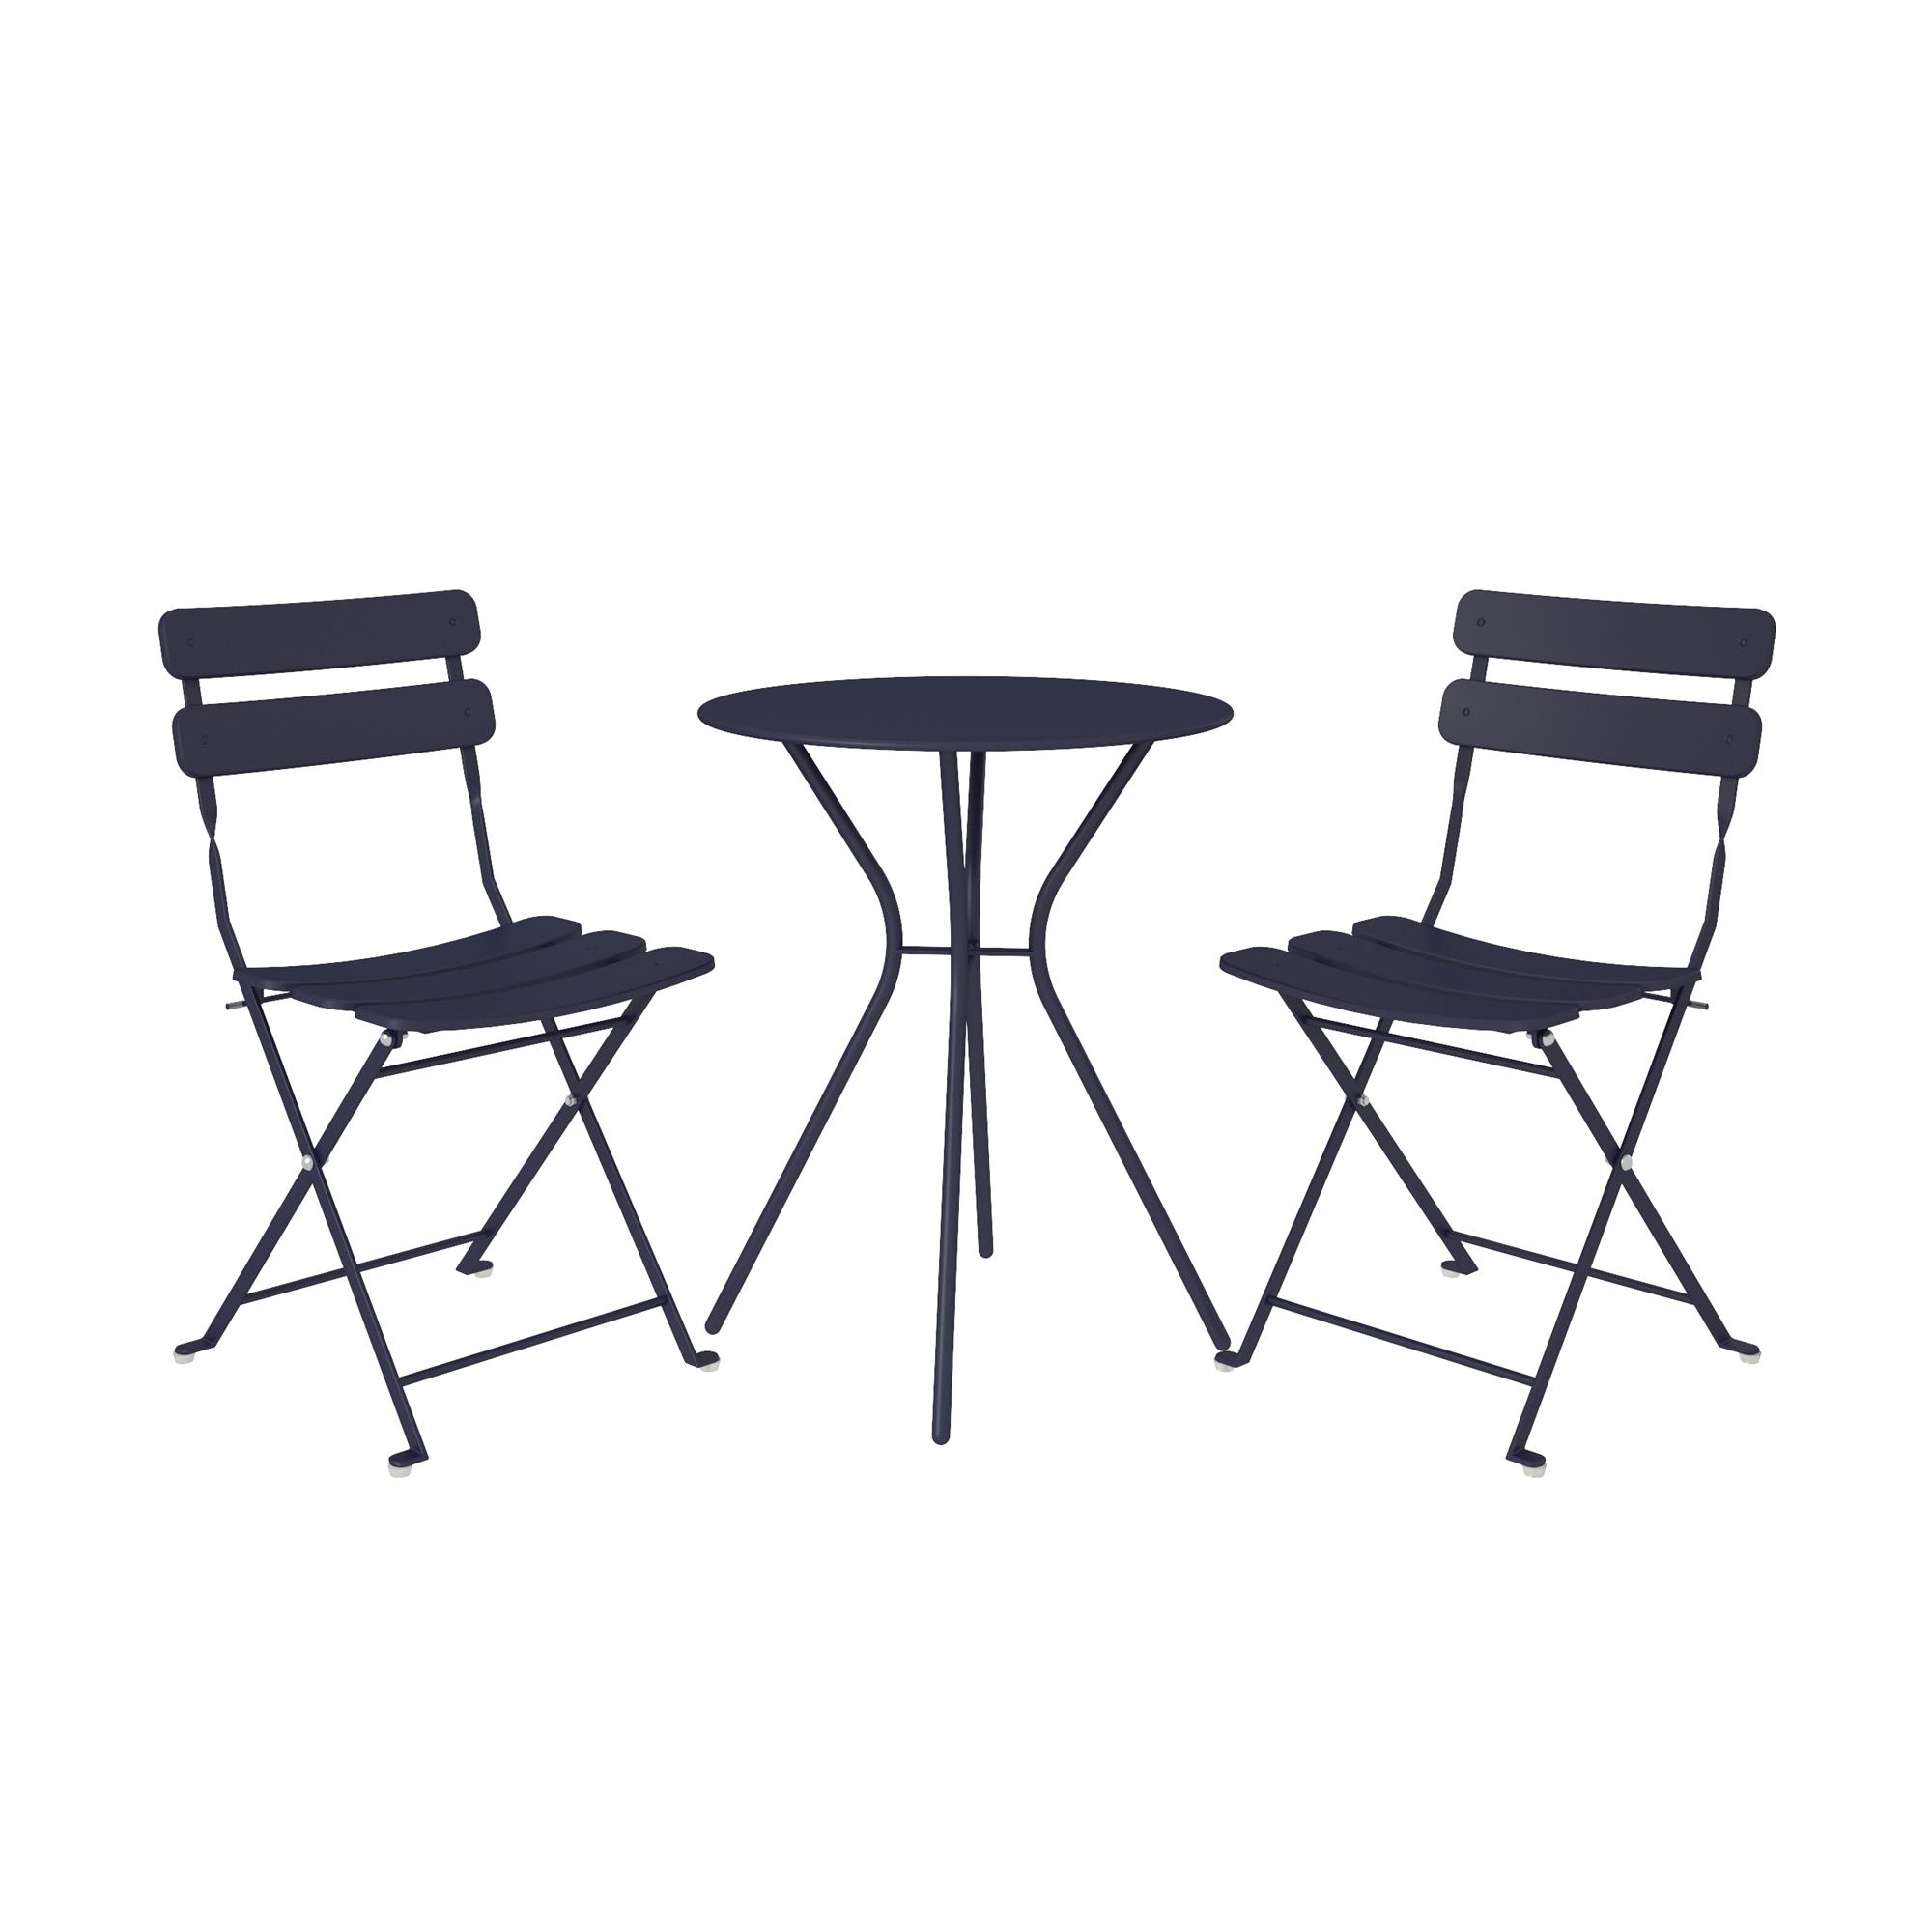 COSCO Outdoor Living, 3 Piece Bistro Set with 2 Folding Chairs, Navy - image 2 of 7